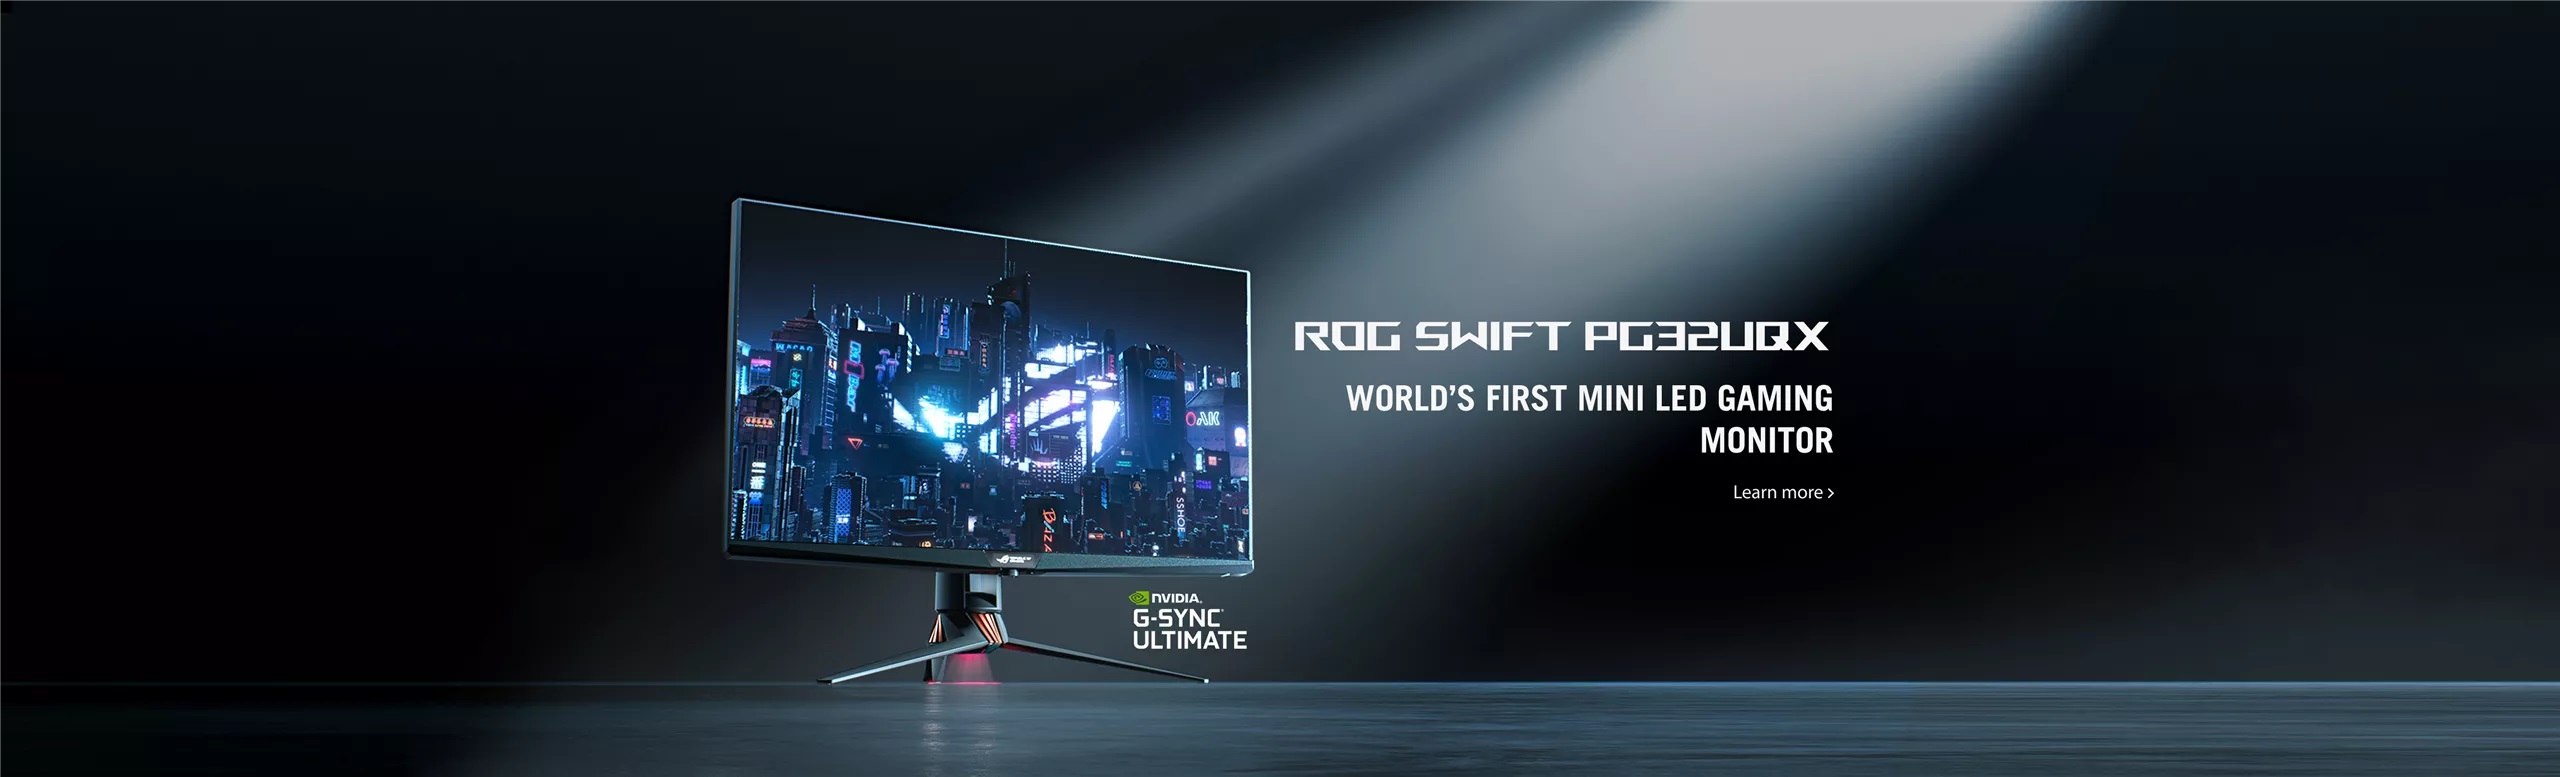 World's first mini led gaming monitor